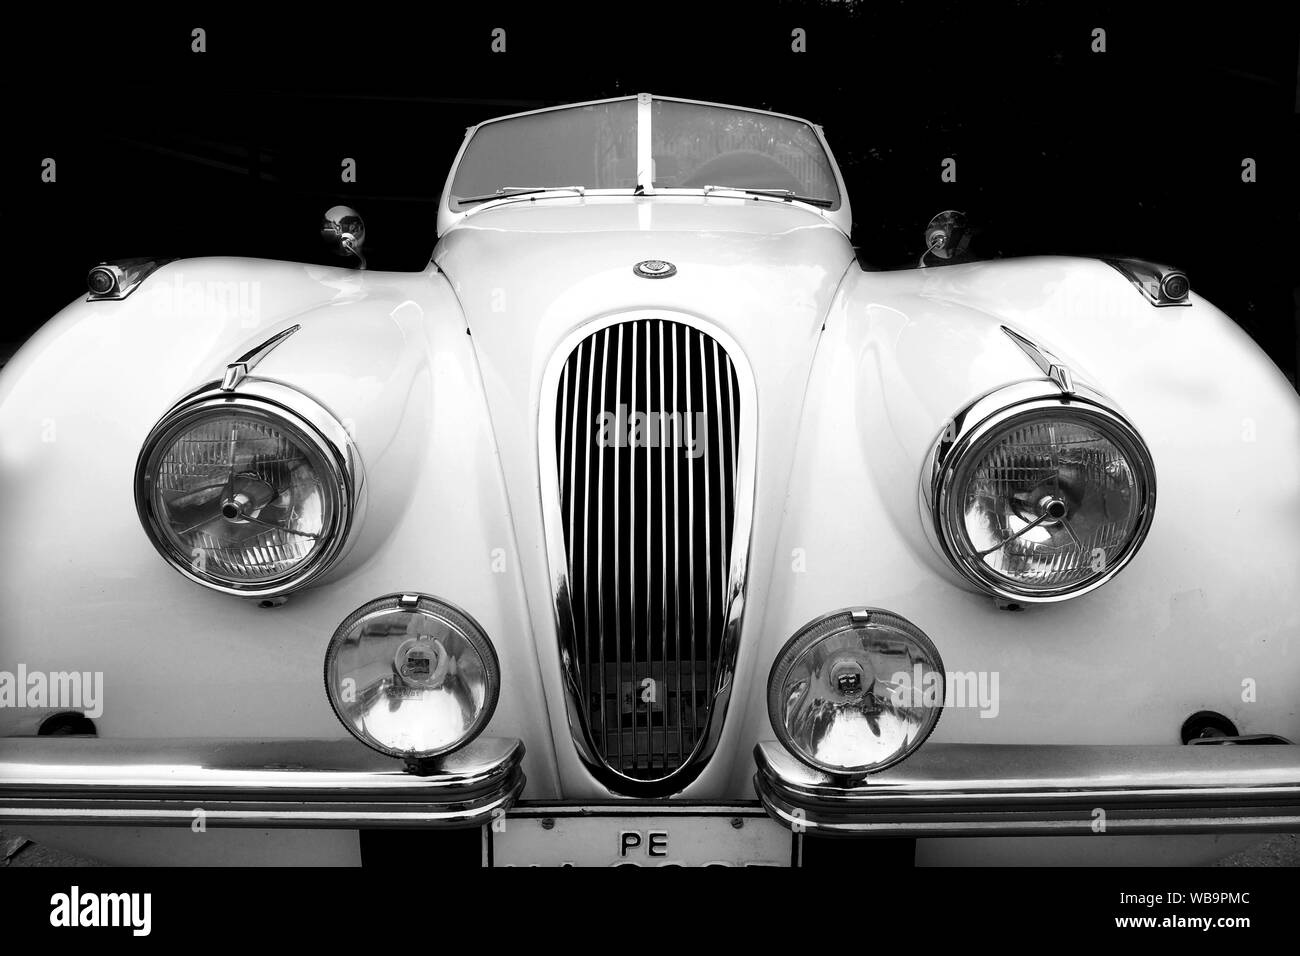 1950 Jaguar XK120 roadster convertible at the 6th Exhibition of British Classic Cars in Lima, Organized by the Antique Automobile Club of Peru - CAAP Stock Photo